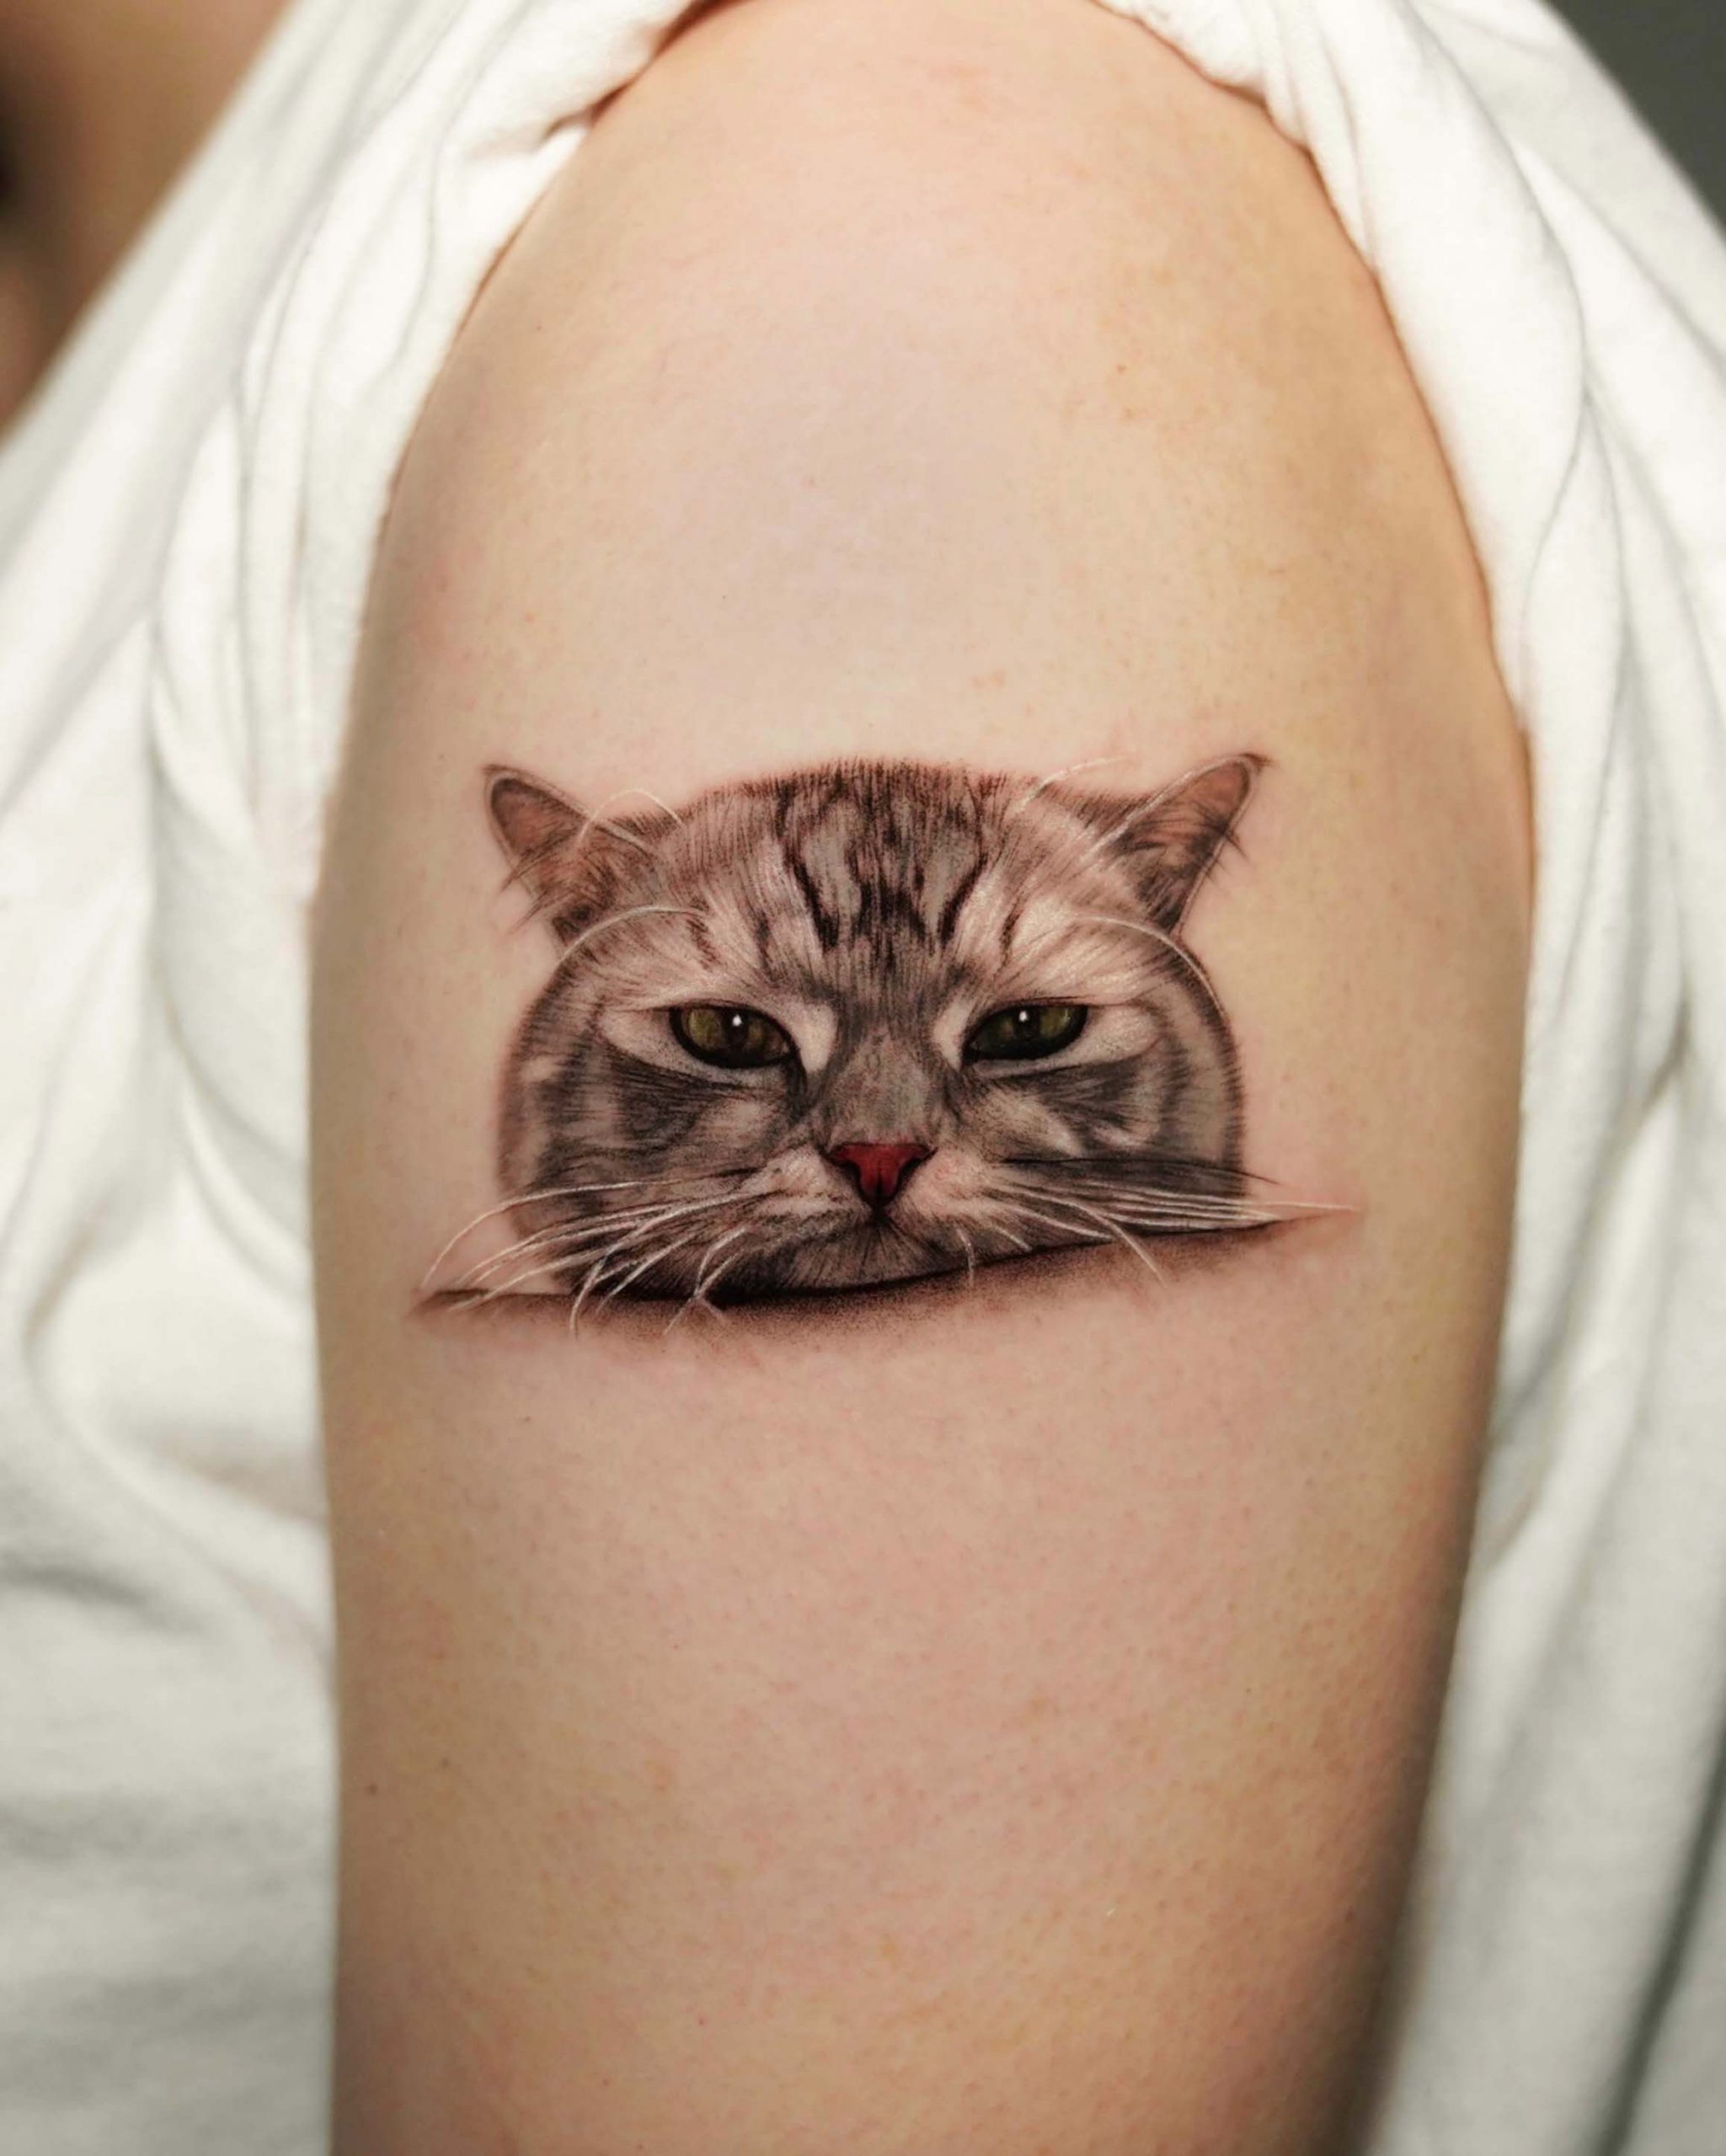 hyper realistic tattoos you wont believe